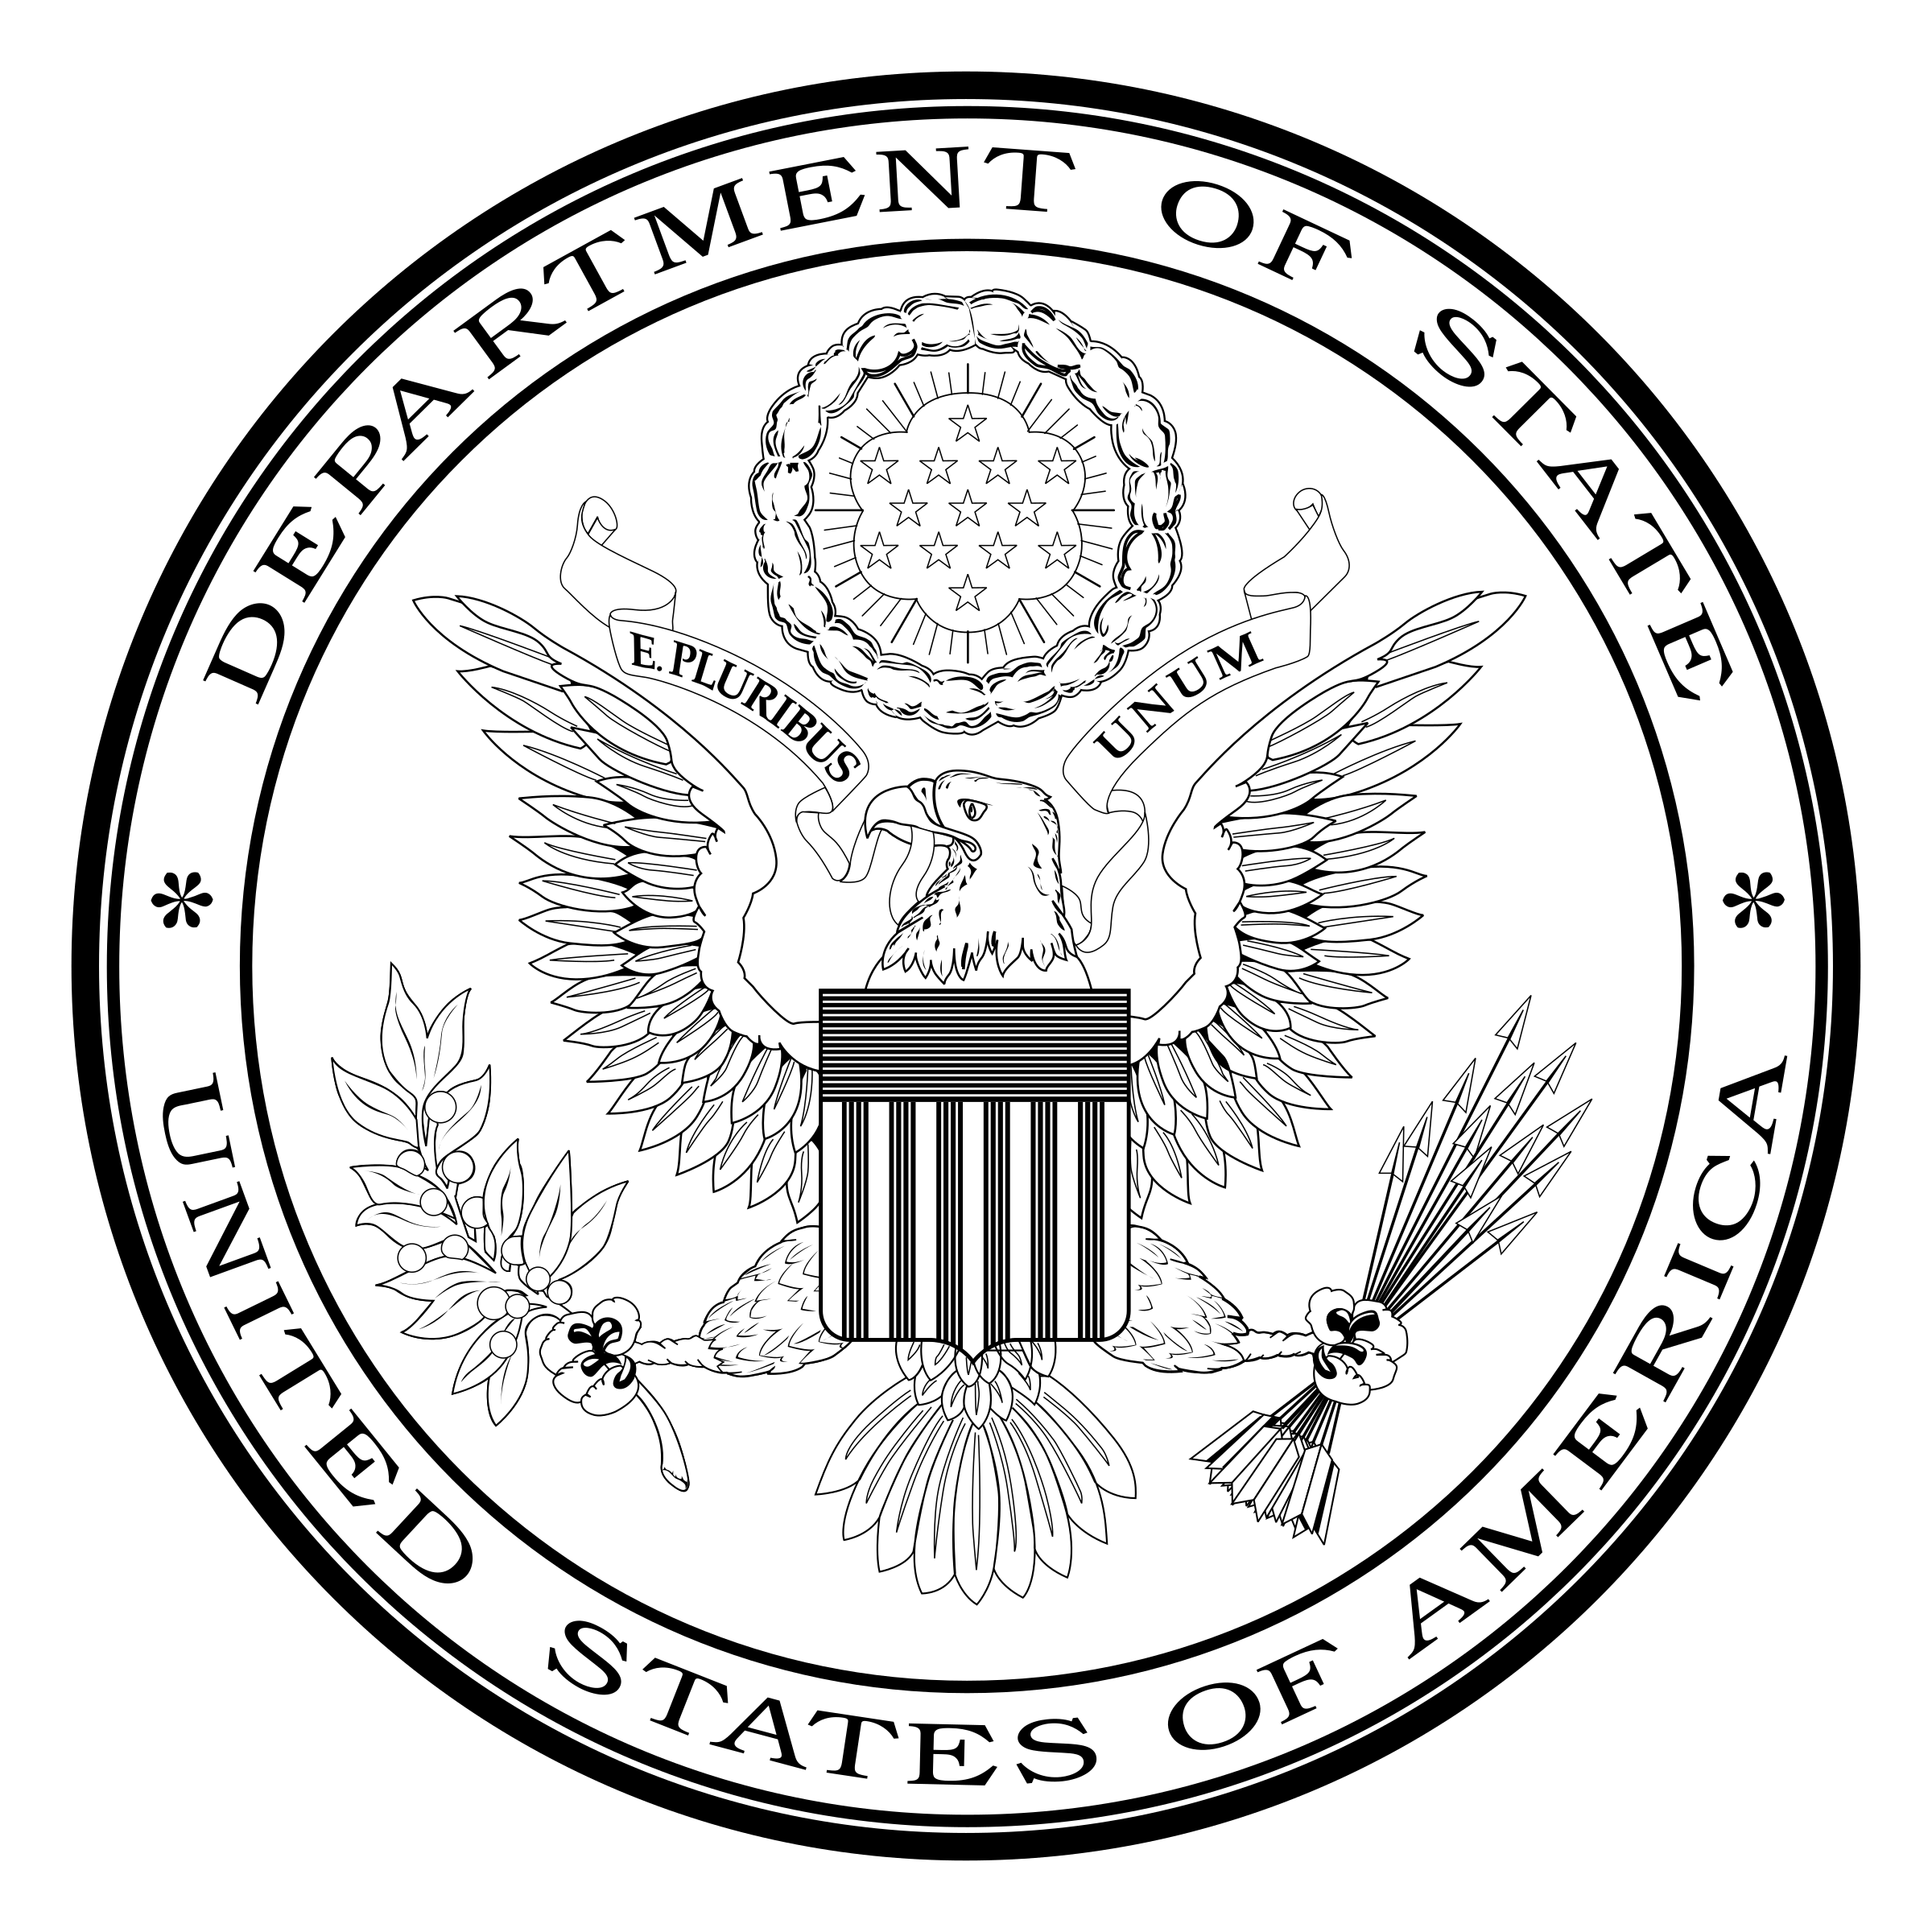 Department of State Logo - US Department of State Logo PNG Transparent & SVG Vector